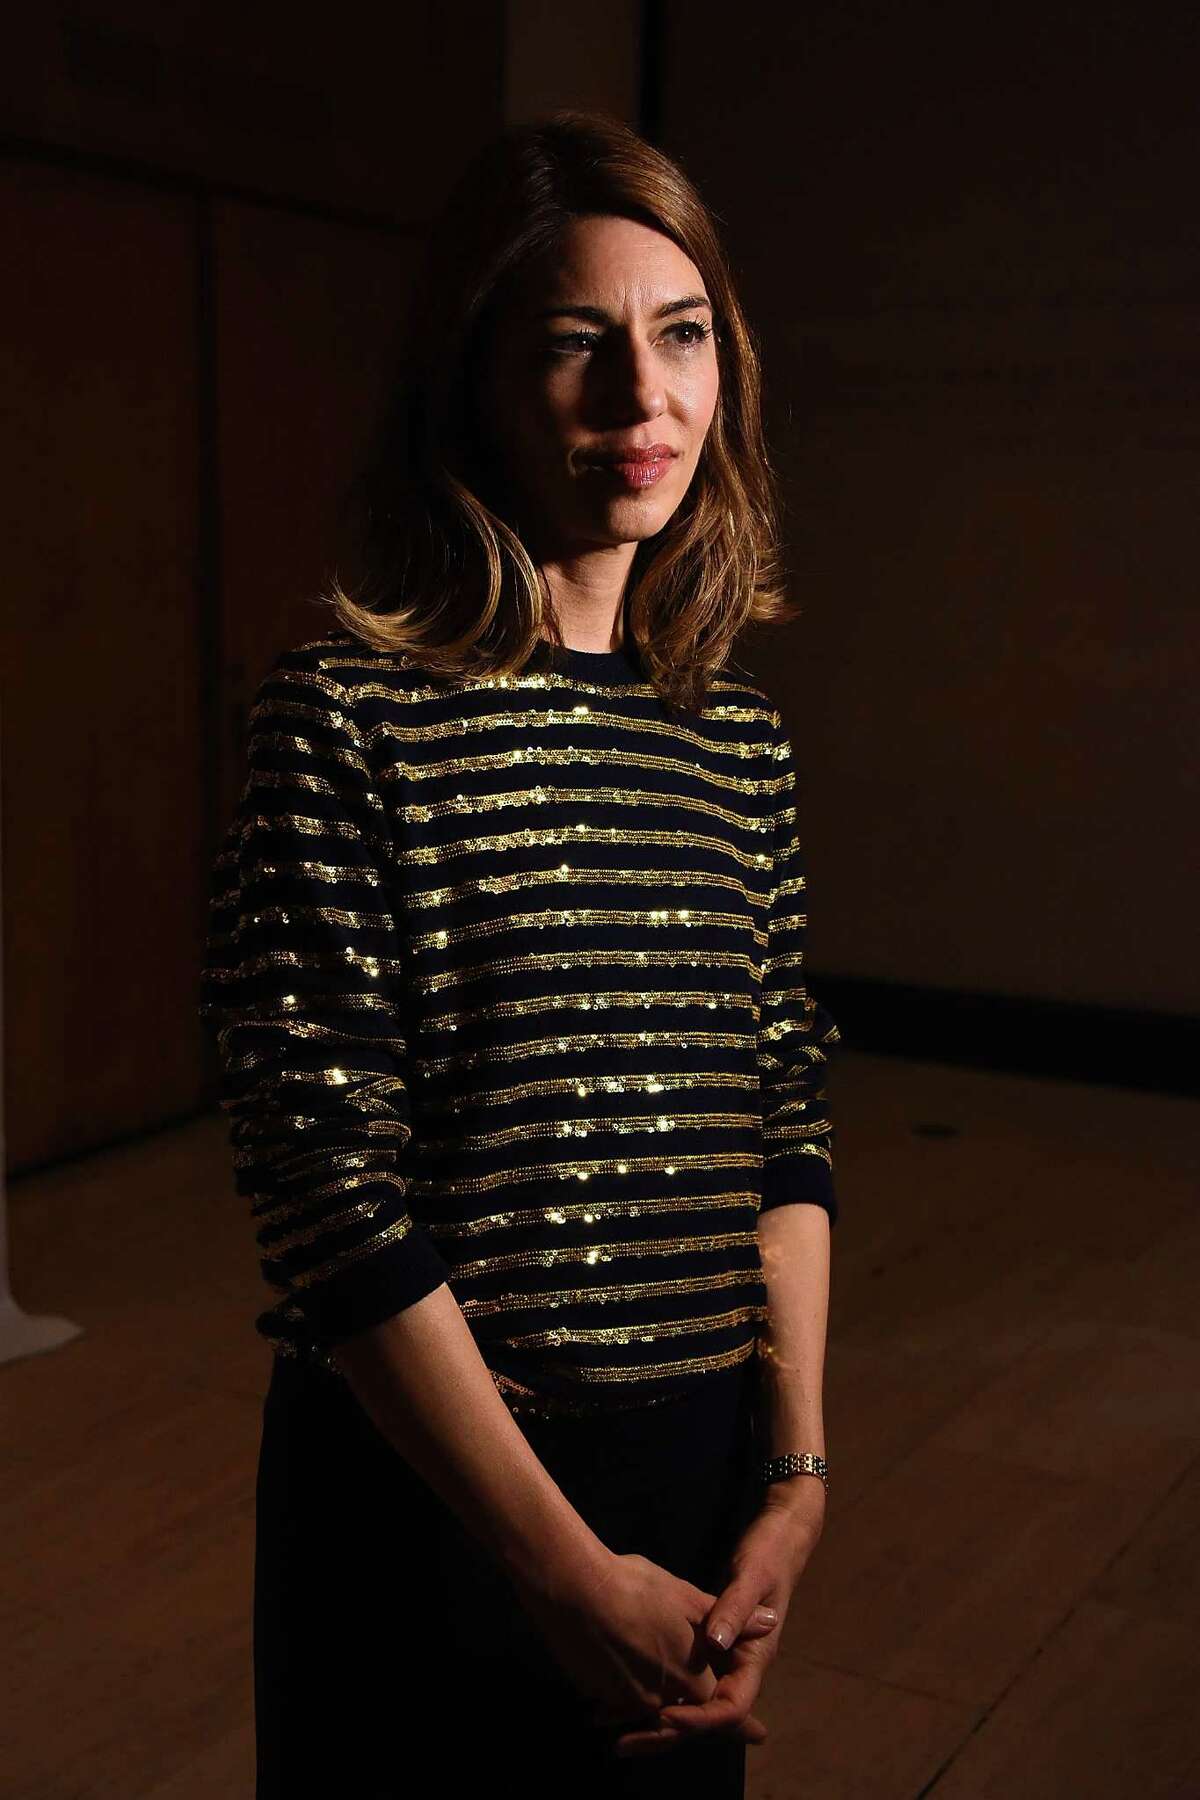 Sofia Coppola attends the 2017 Los Angeles Film Festival - 'Lost In Translation' and 'The Beguiled' screenings at LACMA on June 15, 2017 in Los Angeles, California.